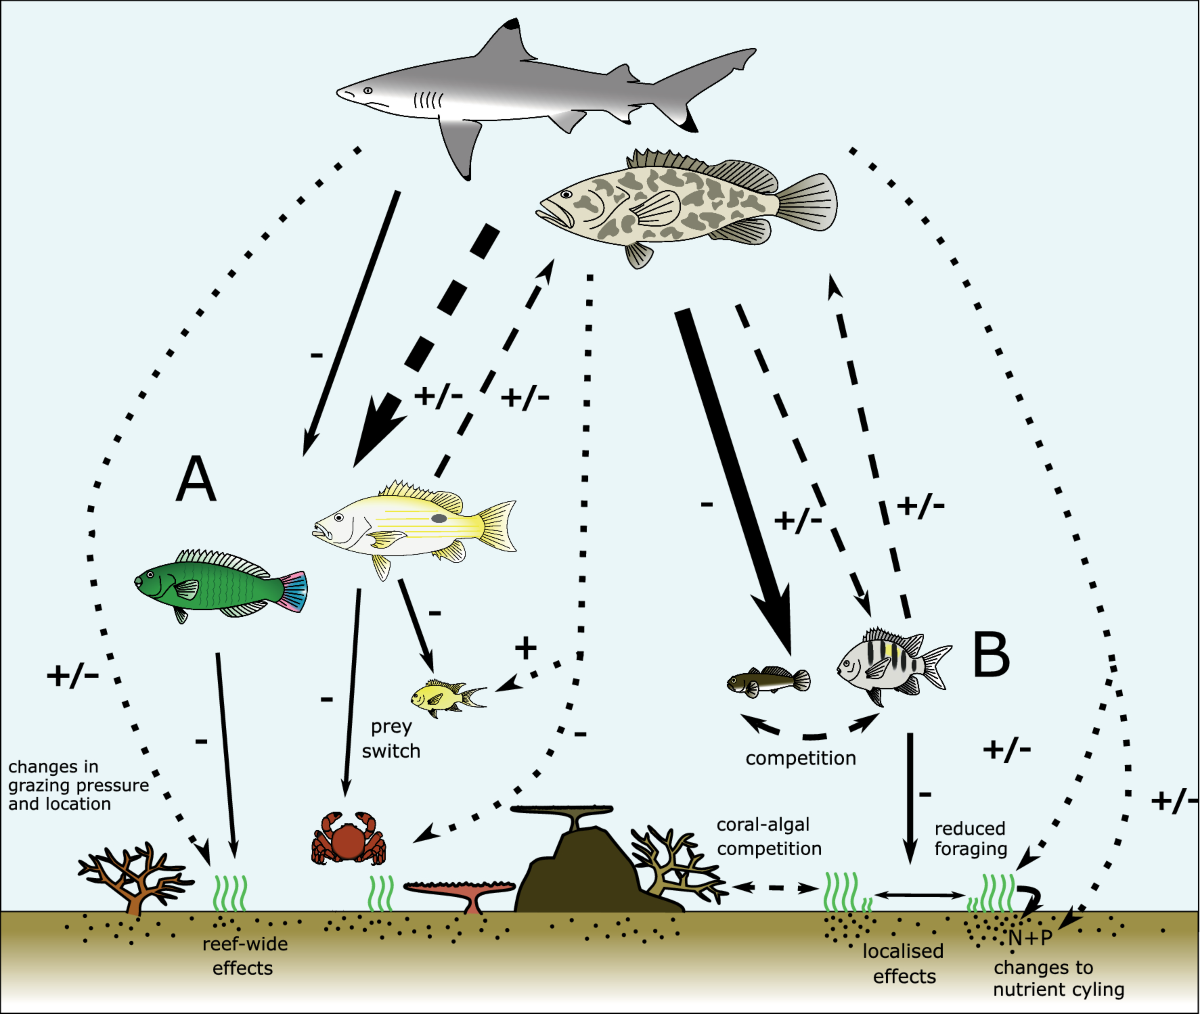 Non-consumptive effects in fish predator–prey interactions on coral reefs